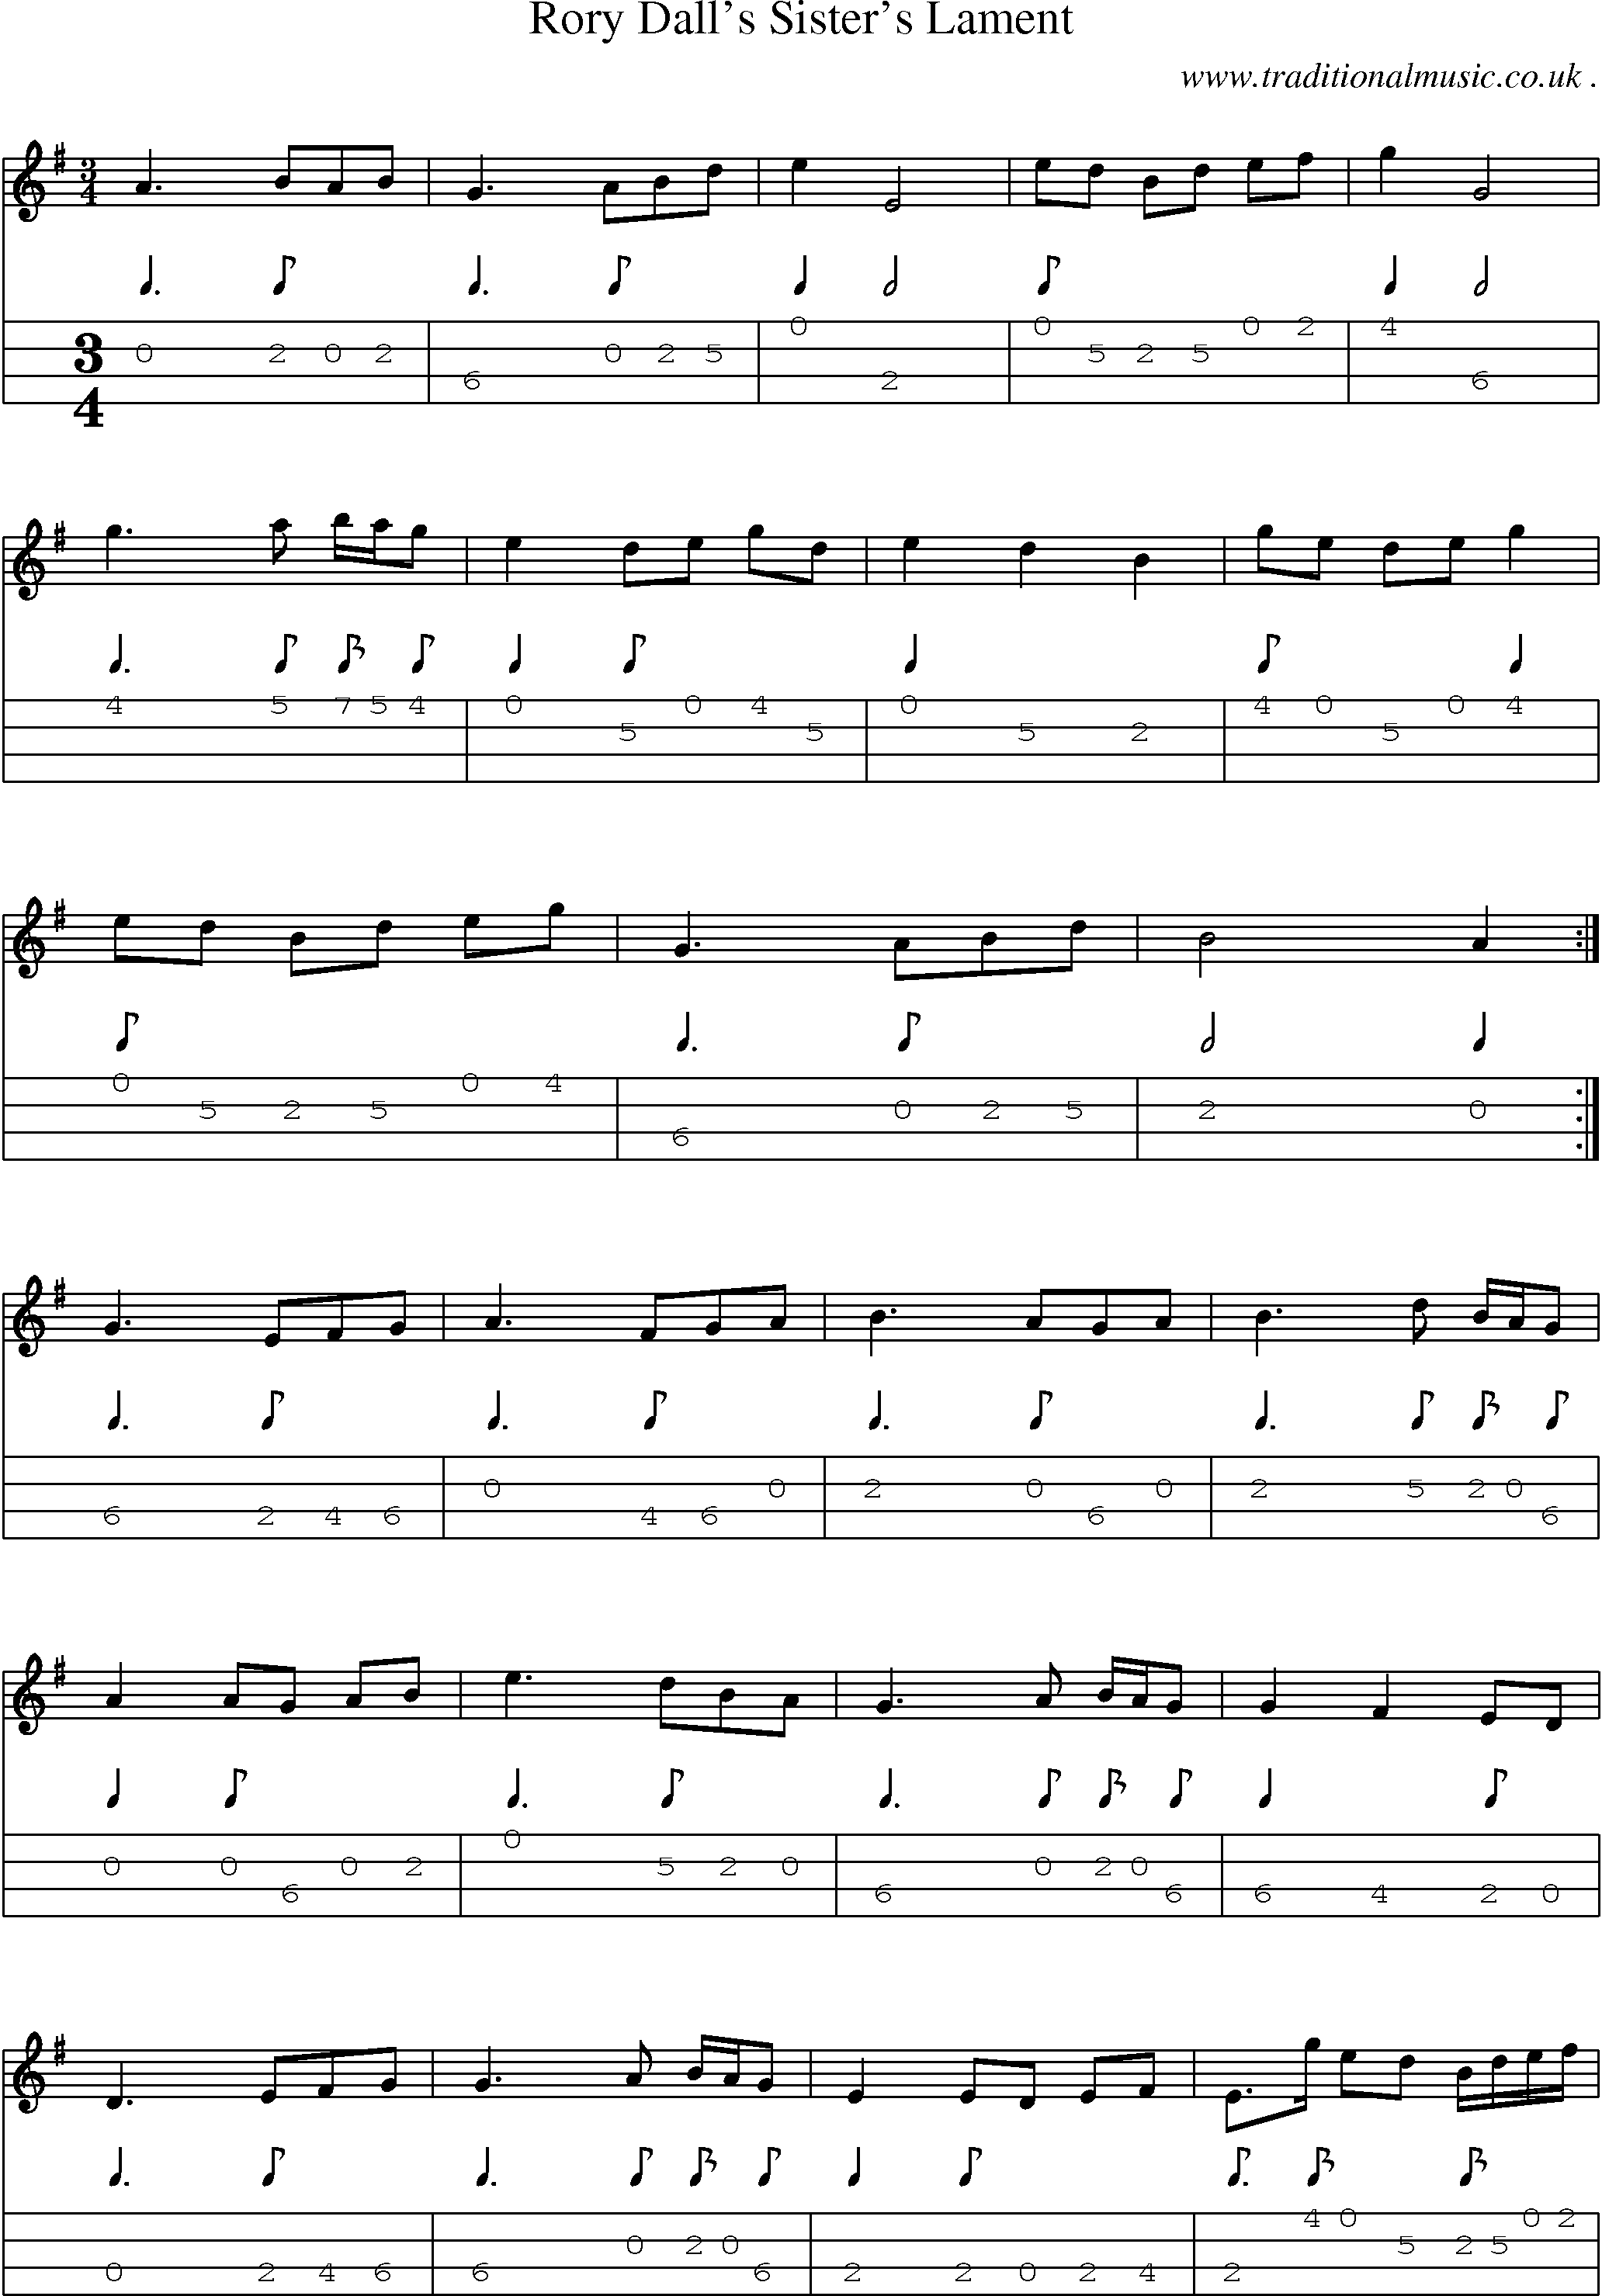 Sheet-music  score, Chords and Mandolin Tabs for Rory Dalls Sisters Lament